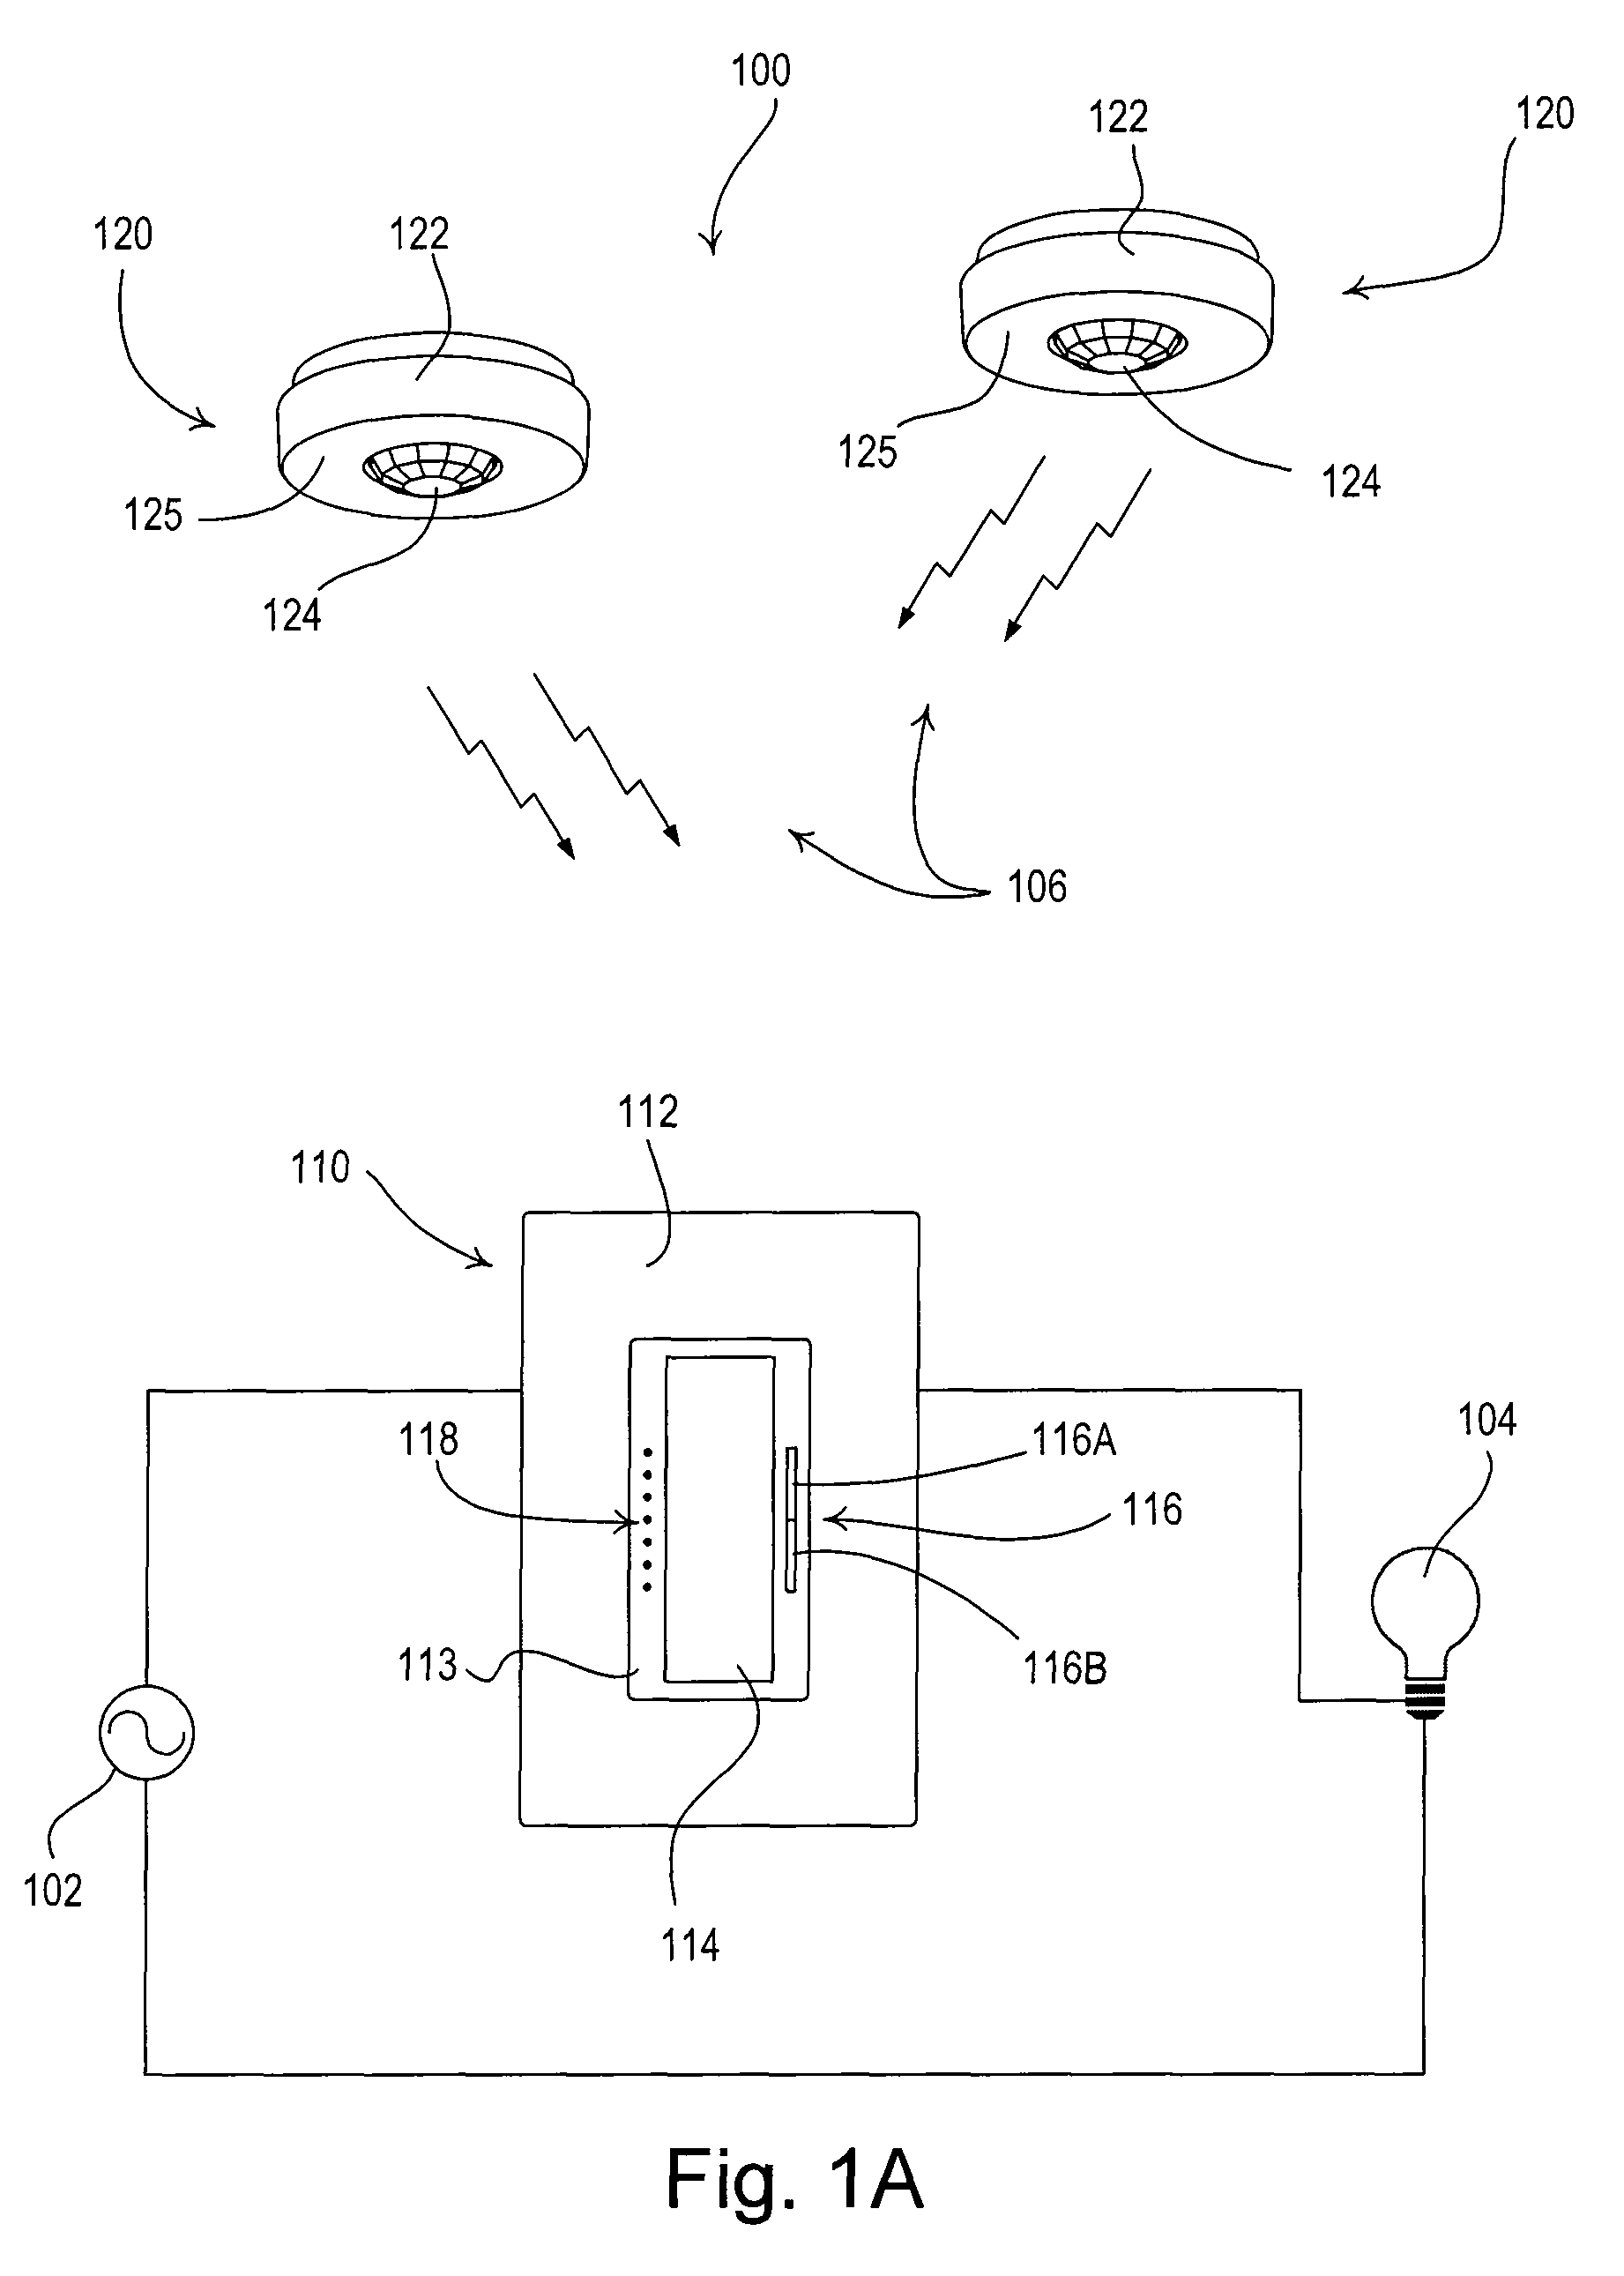 Radio-frequency lighting control system with occupancy sensing